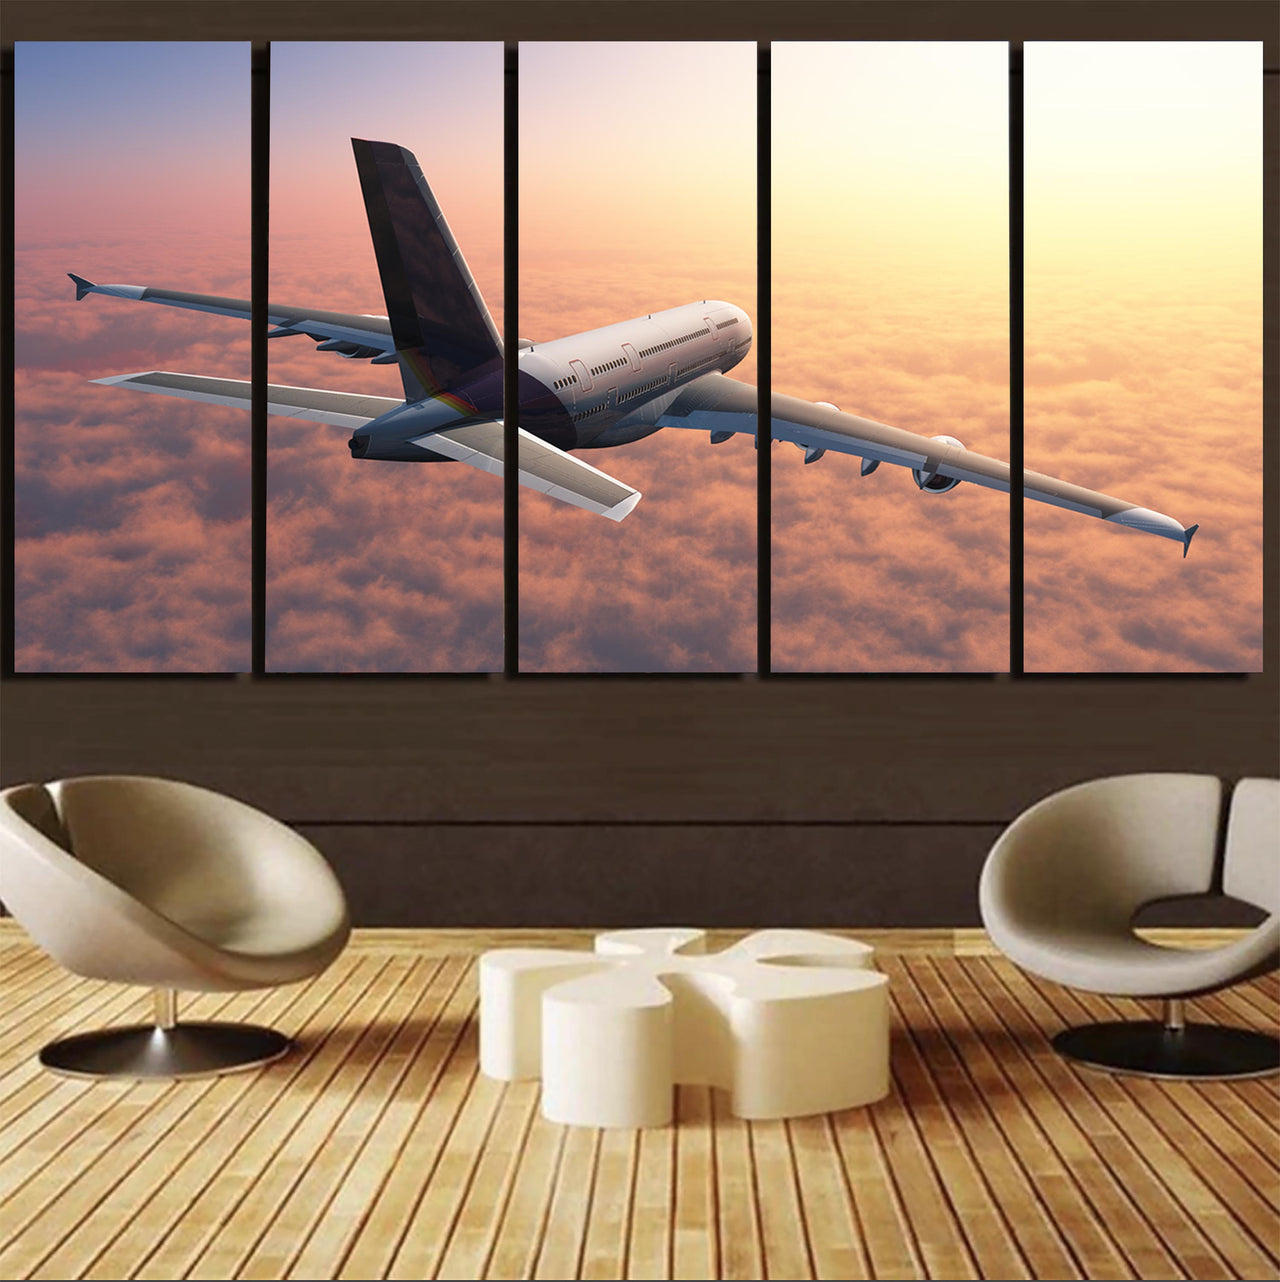 Super Cruising Airbus A380 over Clouds Canvas Prints (5 Pieces)